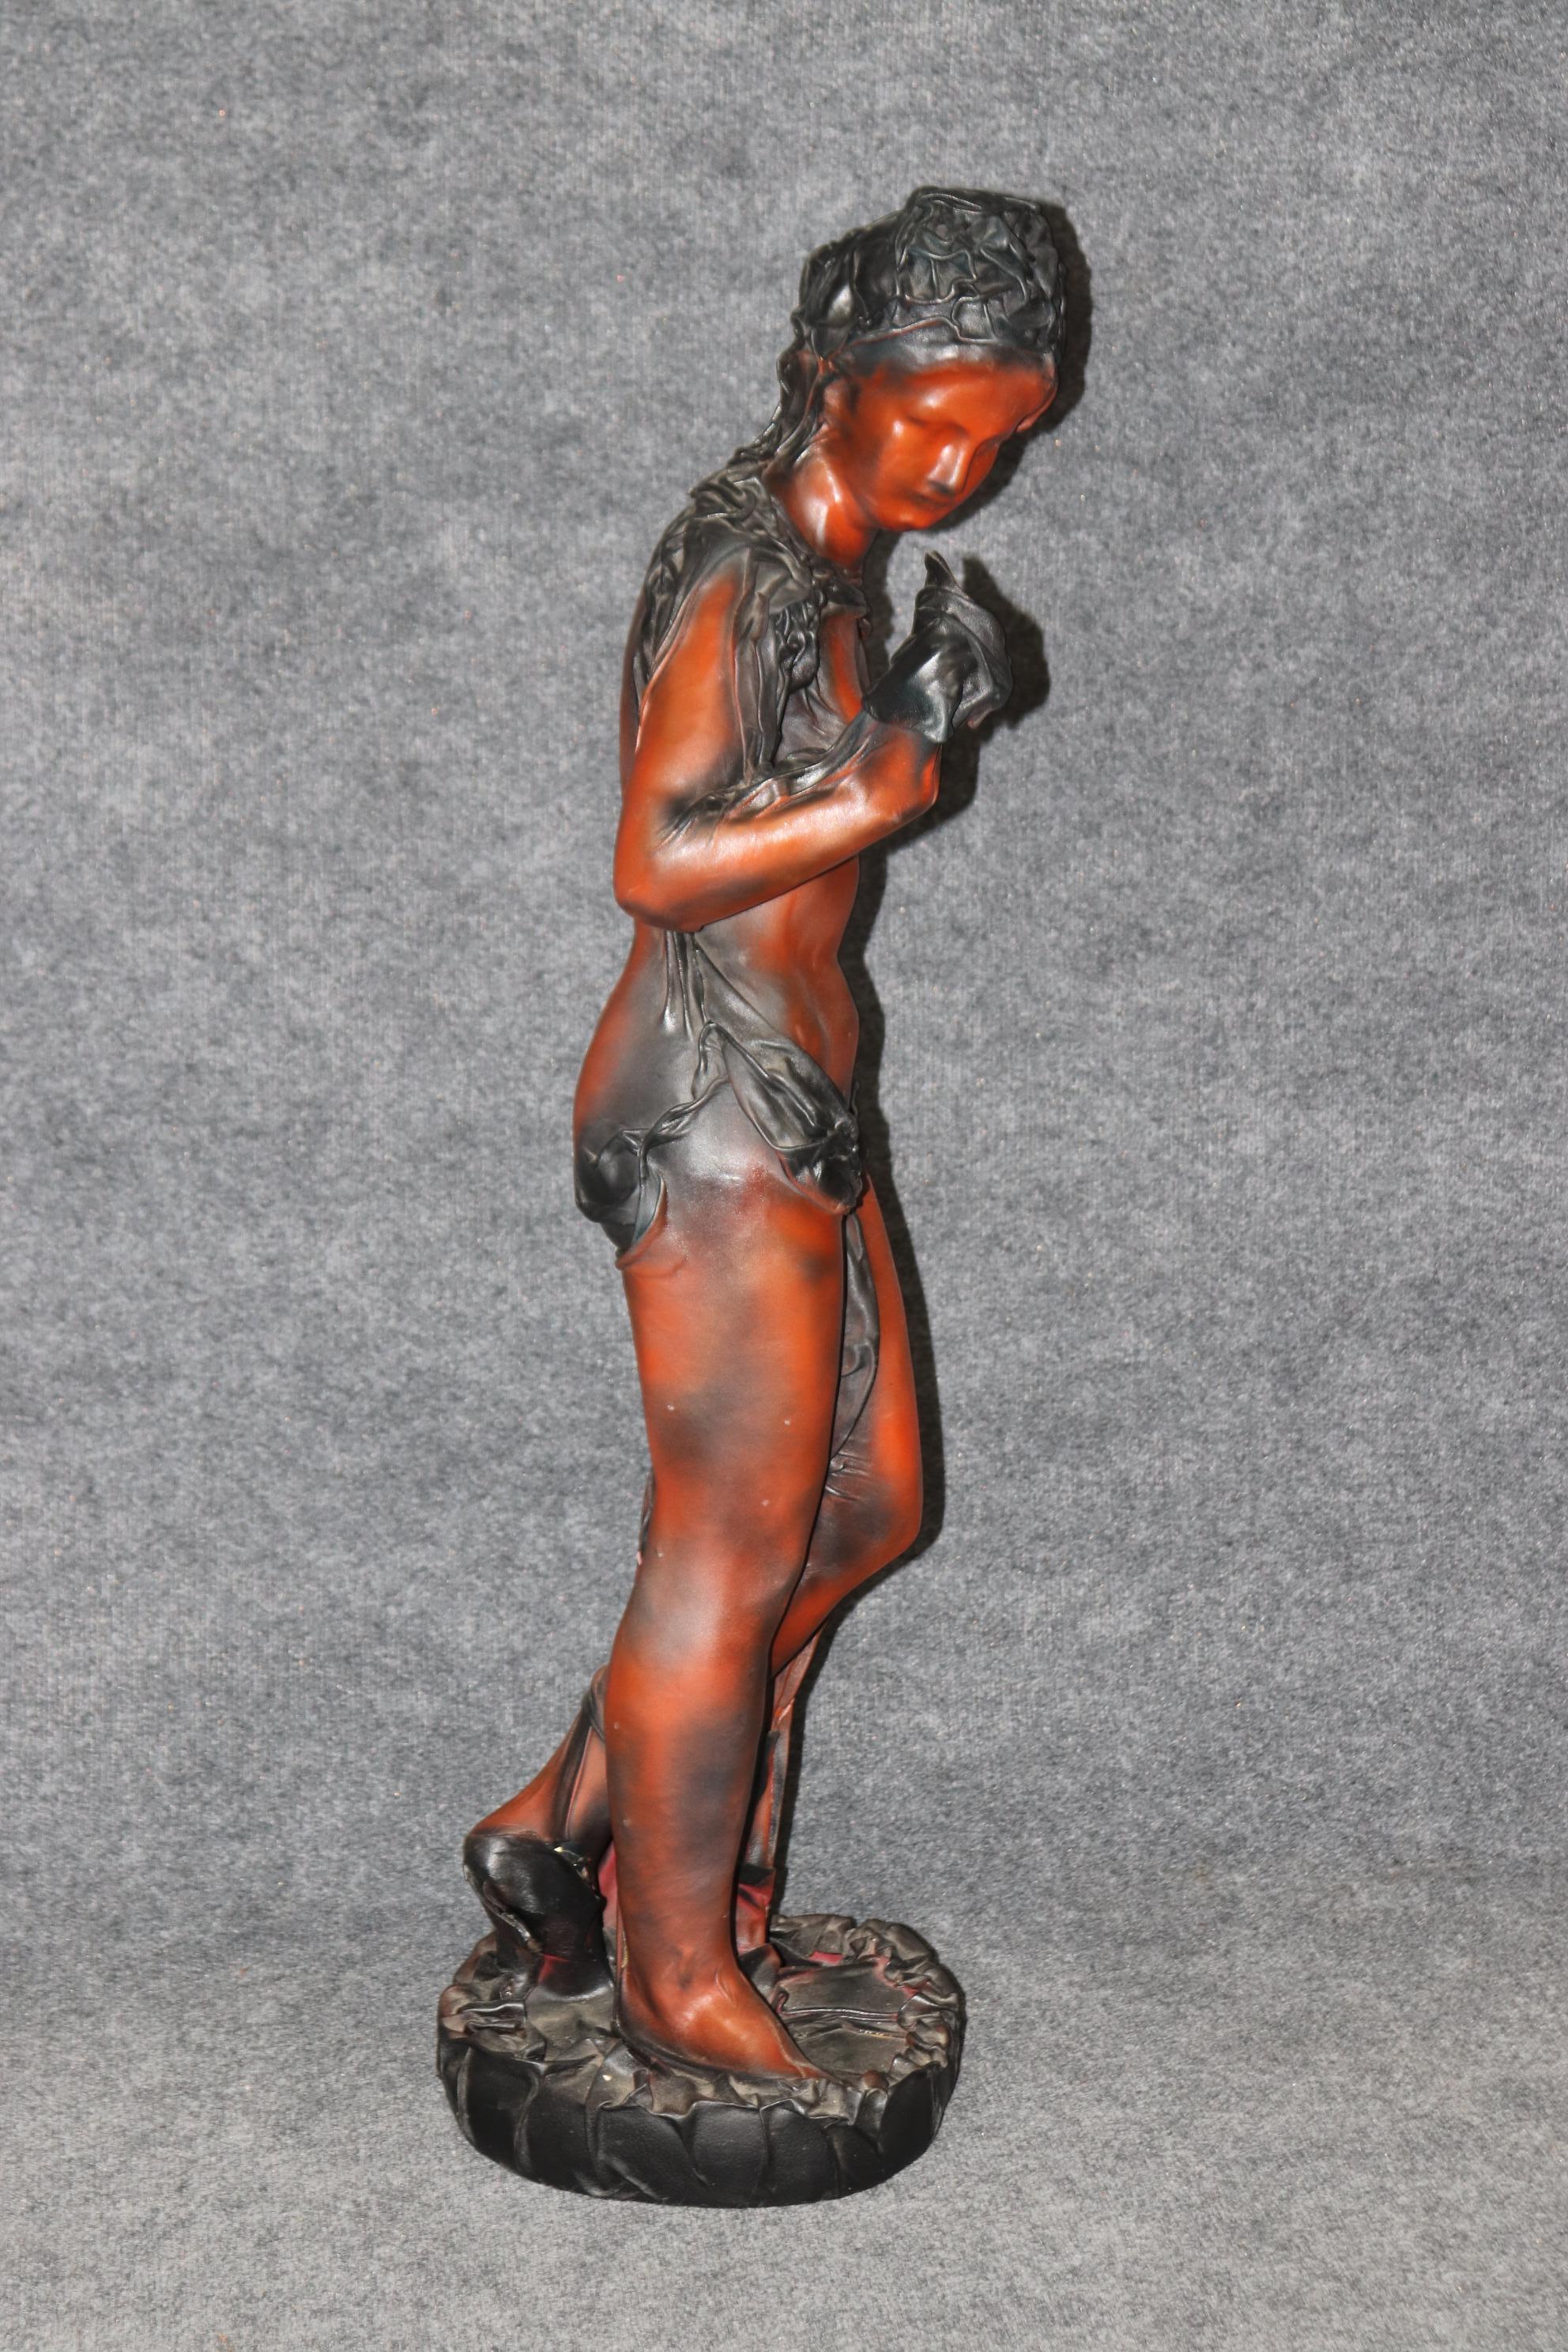 Dimensions- H: 44 1/2in W: 13in D: 11in

This vintage leather wrapped sculpture of a woman by Daphne Du Barry is made of the highest quality! Daphne du Barry is a Dutch sculptor who was born on 5 July 1950. Daphné Du Barry exhibited her bronze